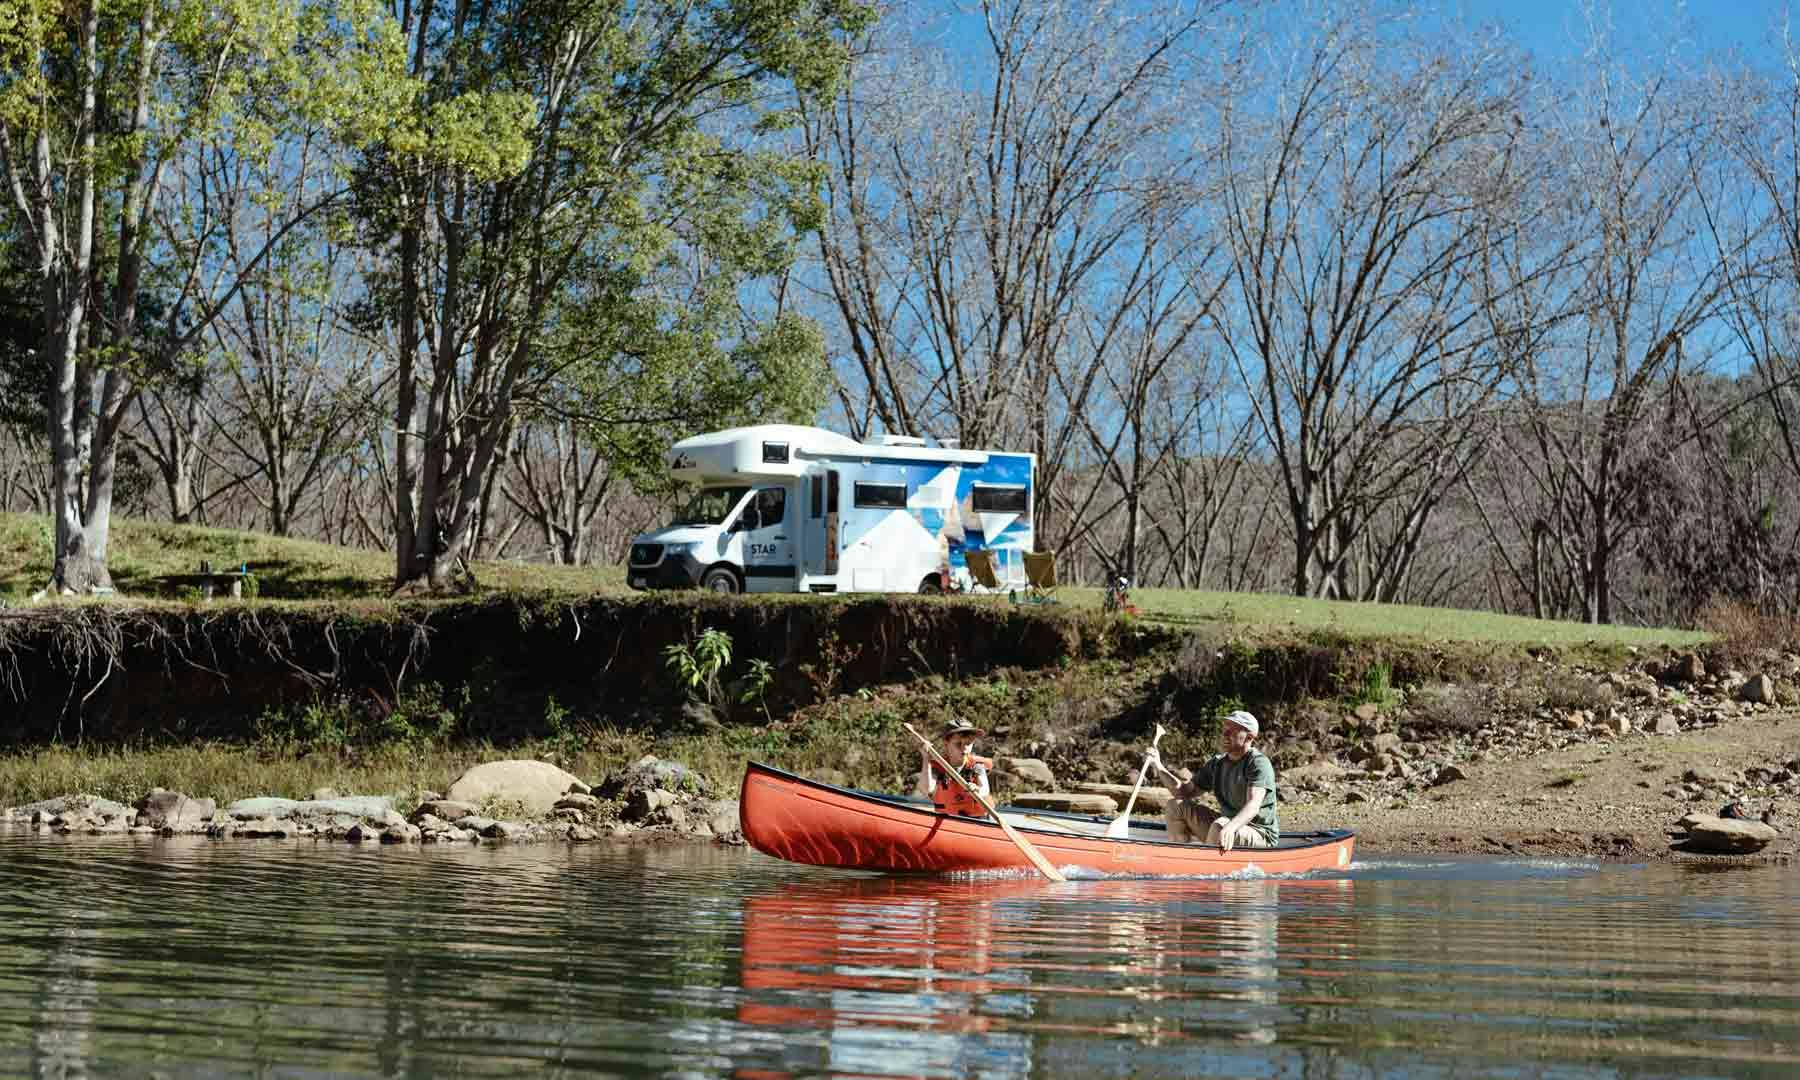 Father and son canoeing down river in Australia